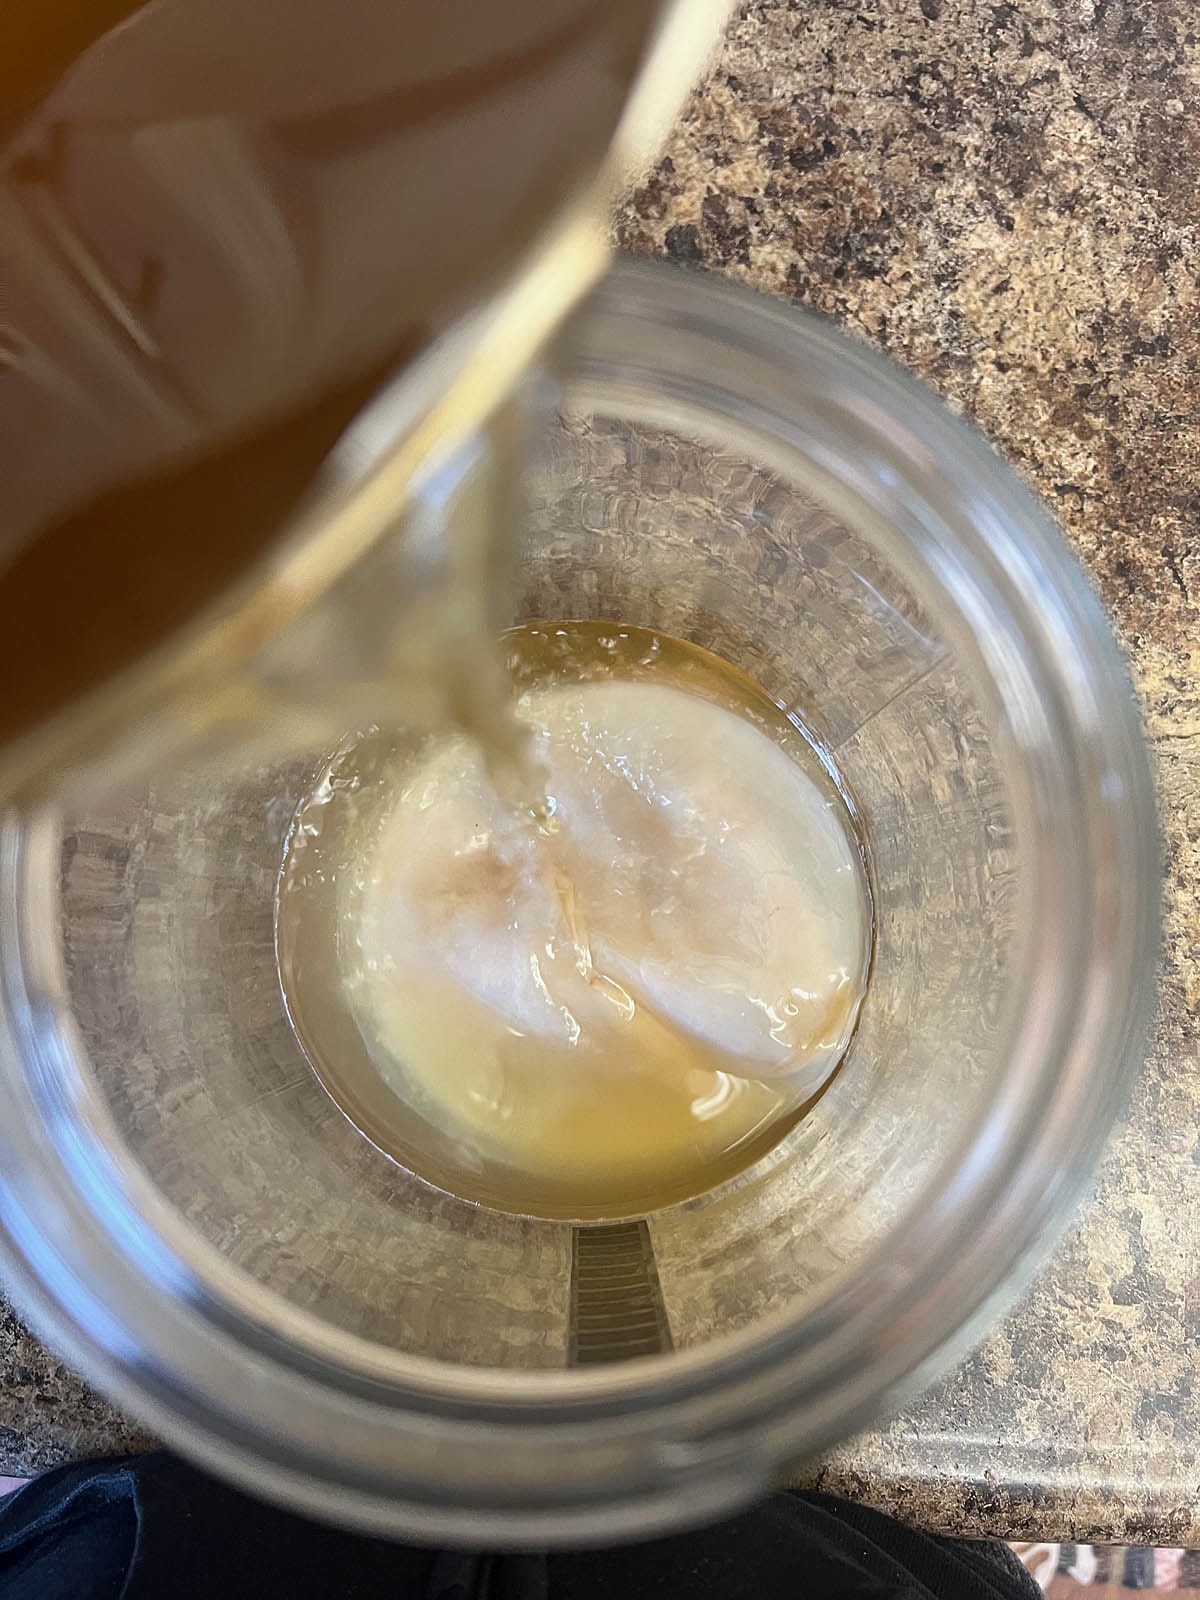 Sweetened tea being poured into a gallon sized jar with a kombucha scoby and kombucha in it.